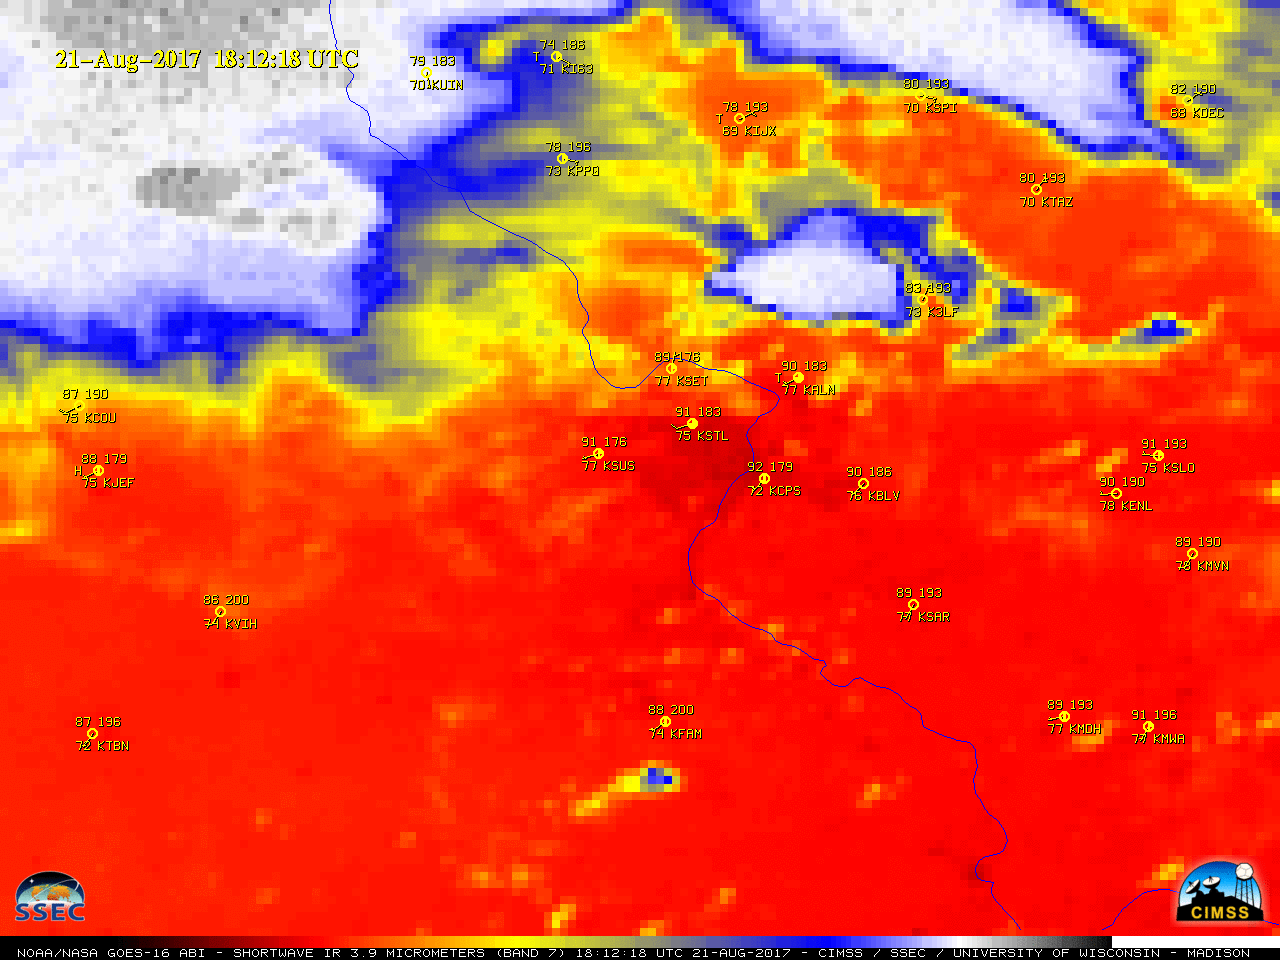 GOES-16 Shortwave Infrared (3.9 µm) images, with hourly surface reports plotted in yellow [click to play animation]